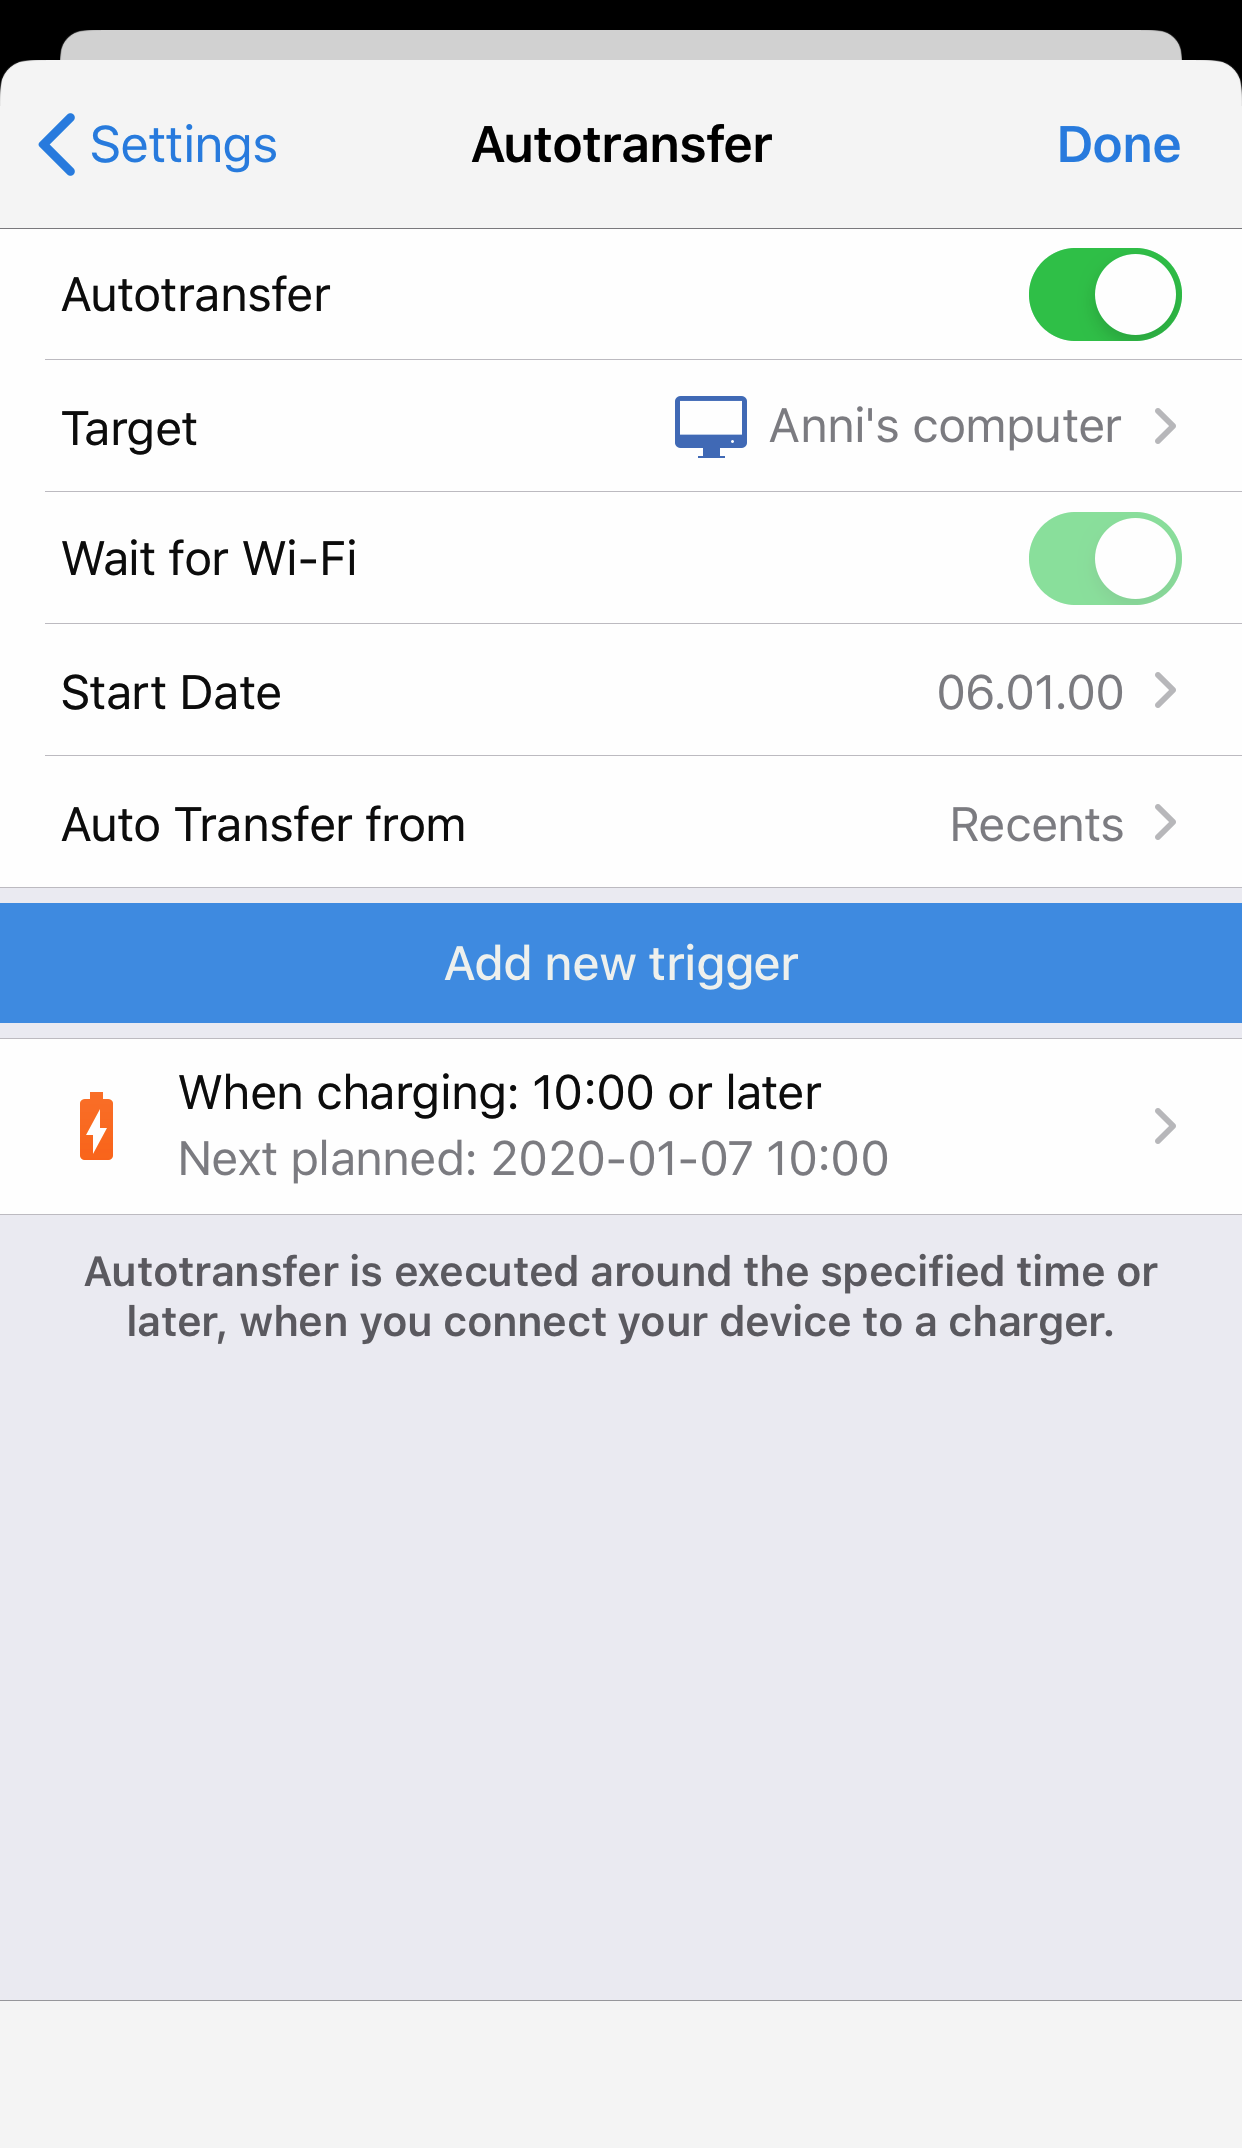 Autotransfer charging trigger for 10am